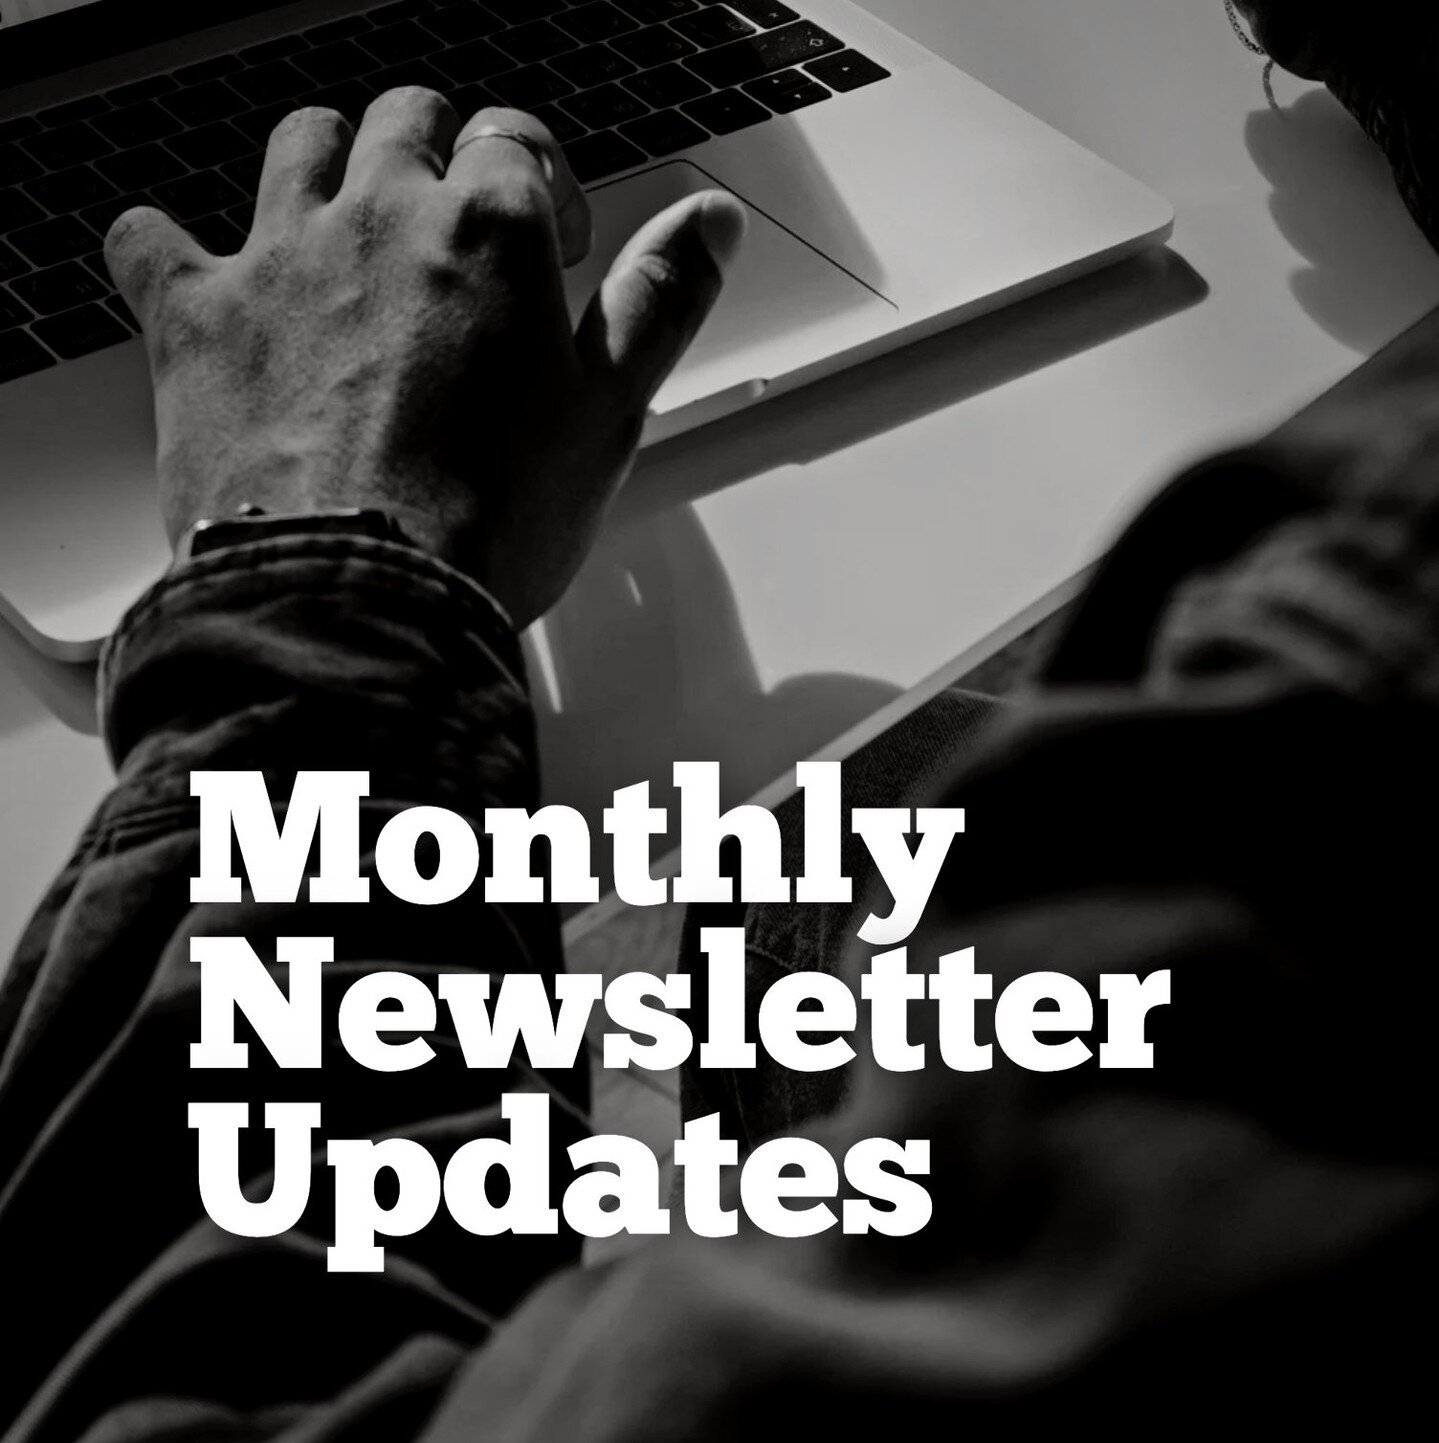 #DidYouKnow you can view our recent newsletter through our website? ⁠
⁠
Read up on the latest news each month and stay informed as we announce events, celebrate donors, and share success stories. View our September newsletter now on our website, or s